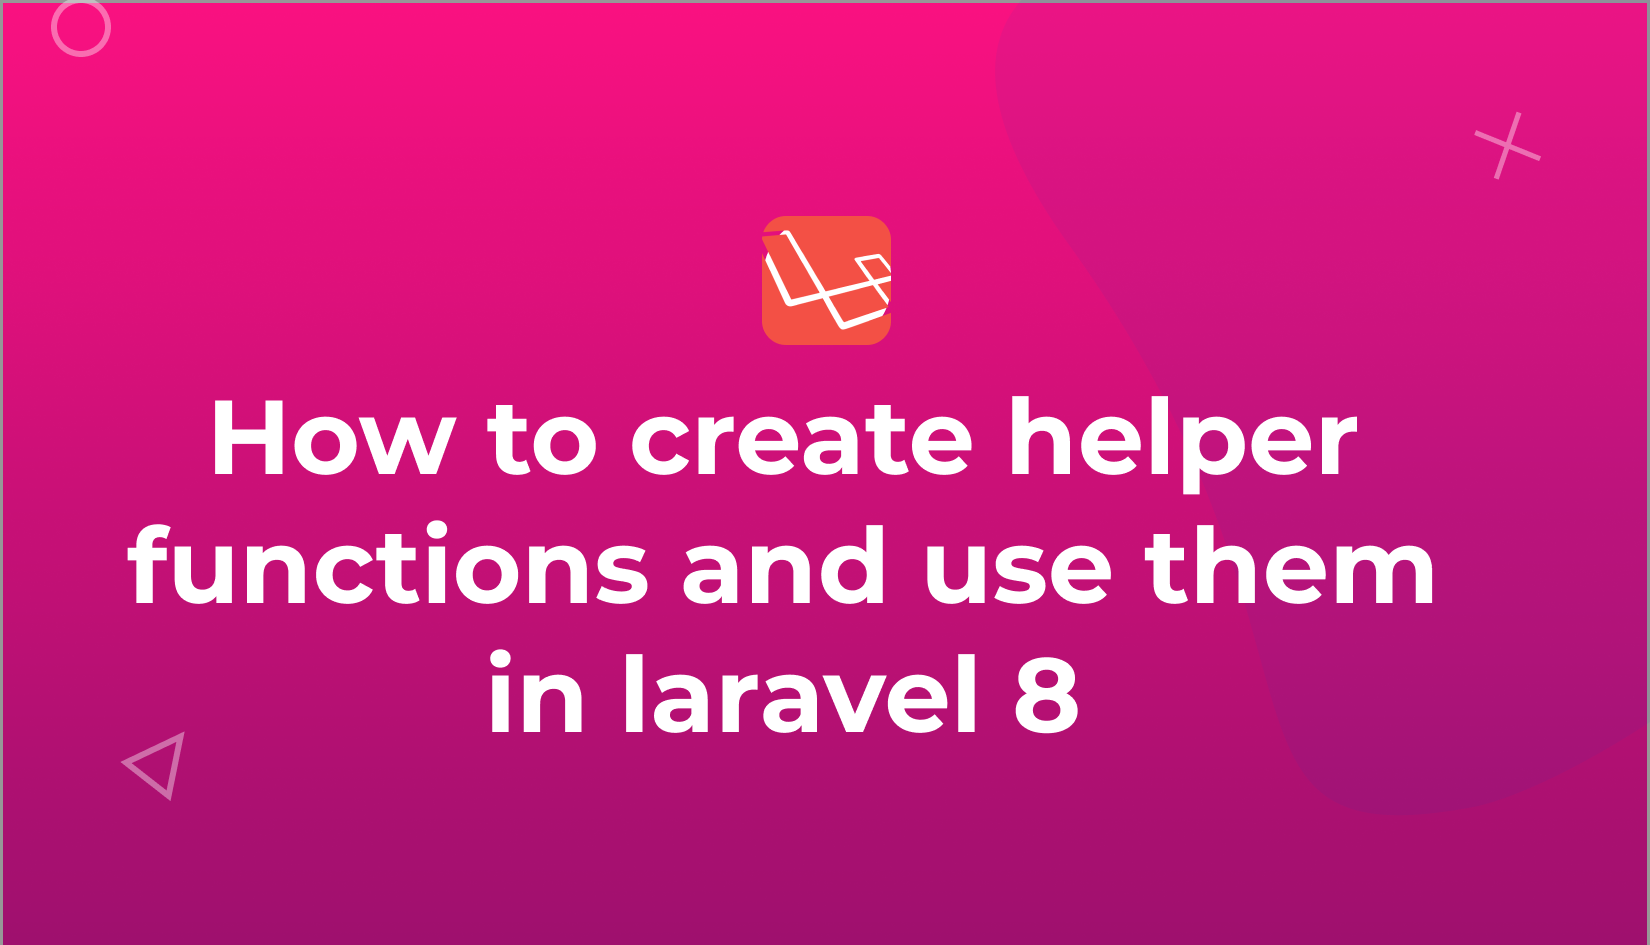 How to create helper functions and use them in laravel 8